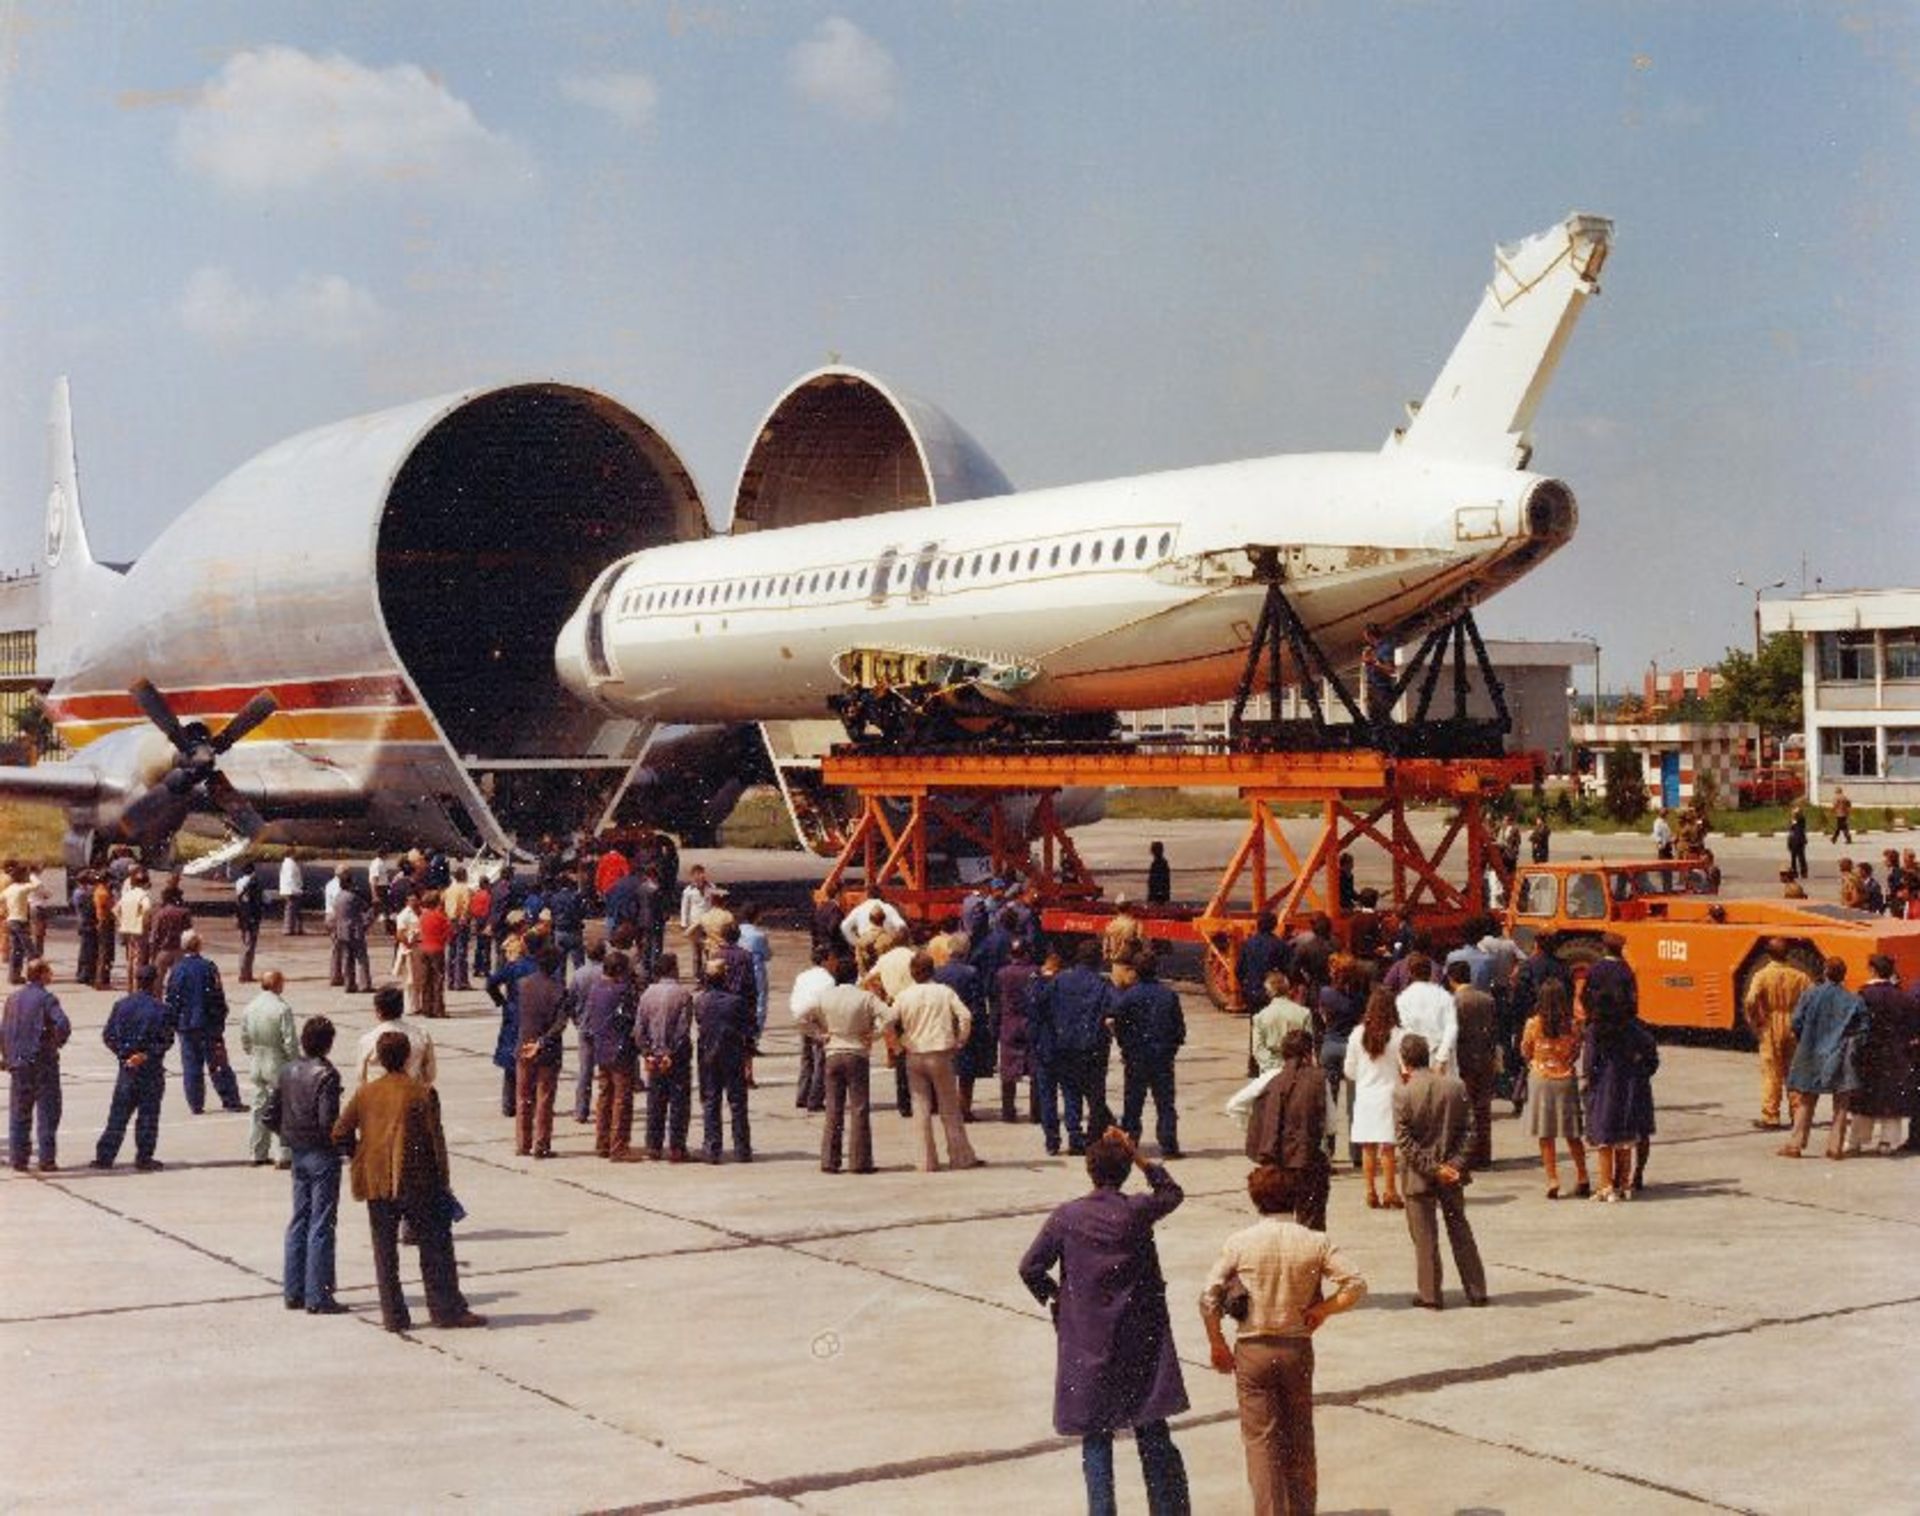 "Negrești" presidential plane, for the official flights of President Ion Iliescu, 1989 - Image 15 of 15